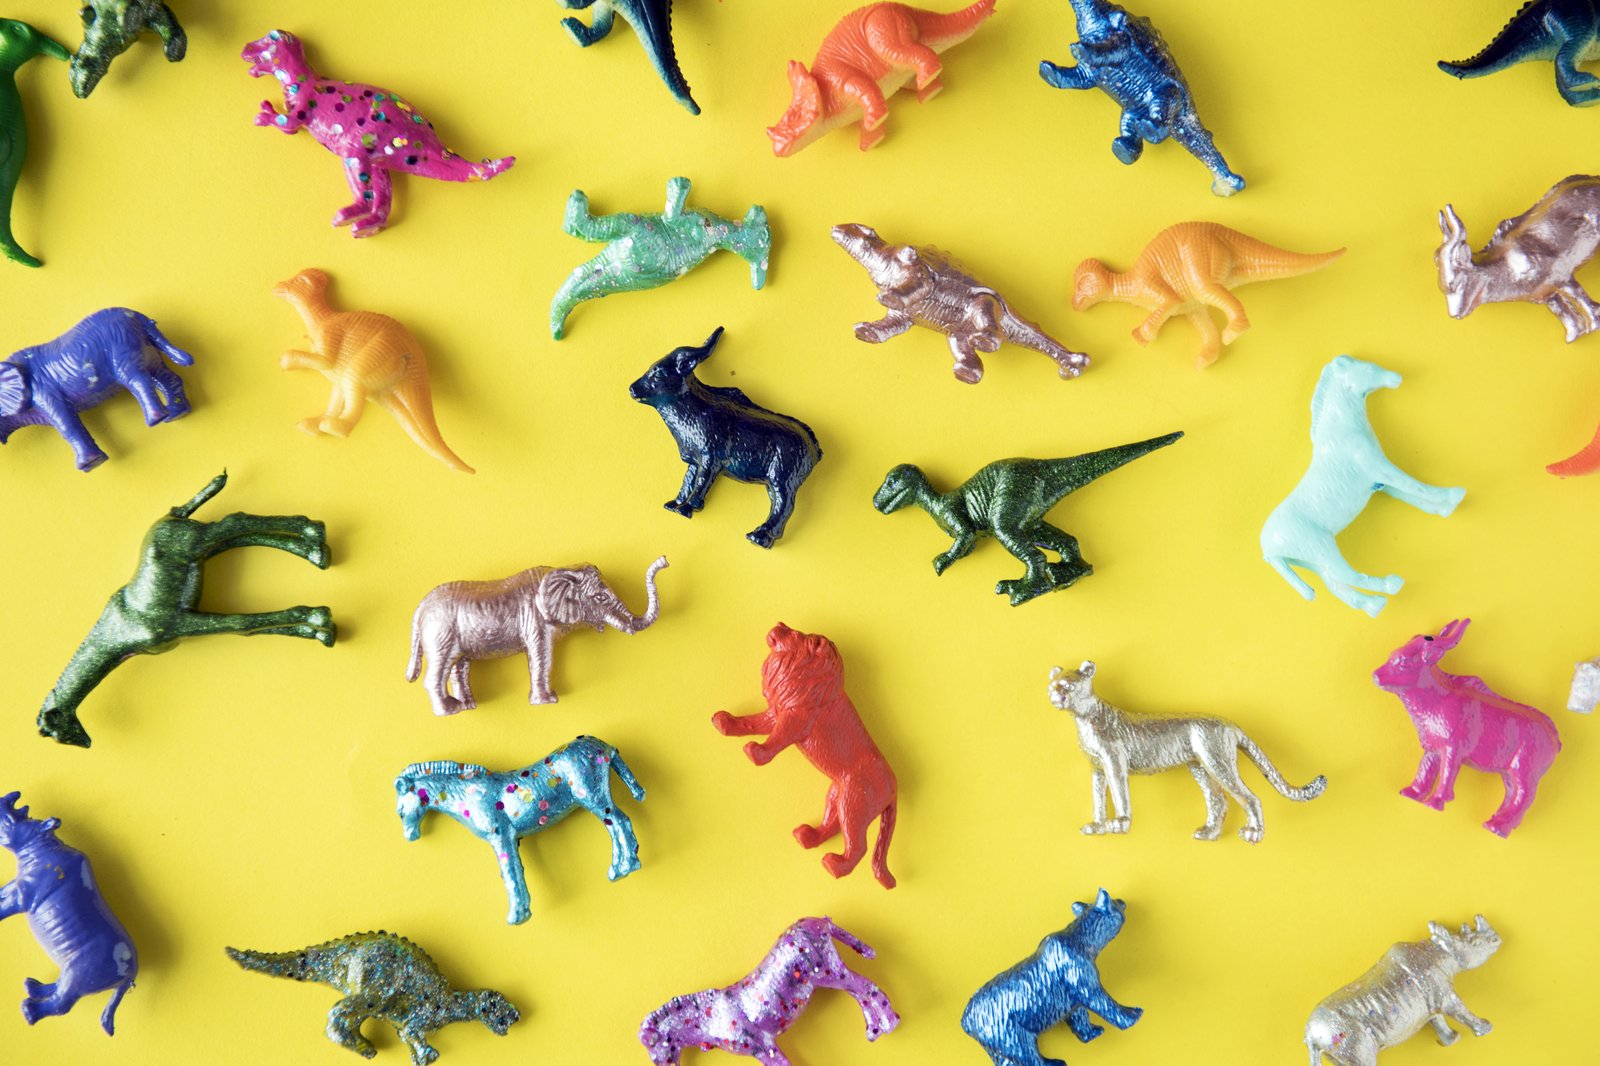 Toy animals and dinosaurs on yellow background